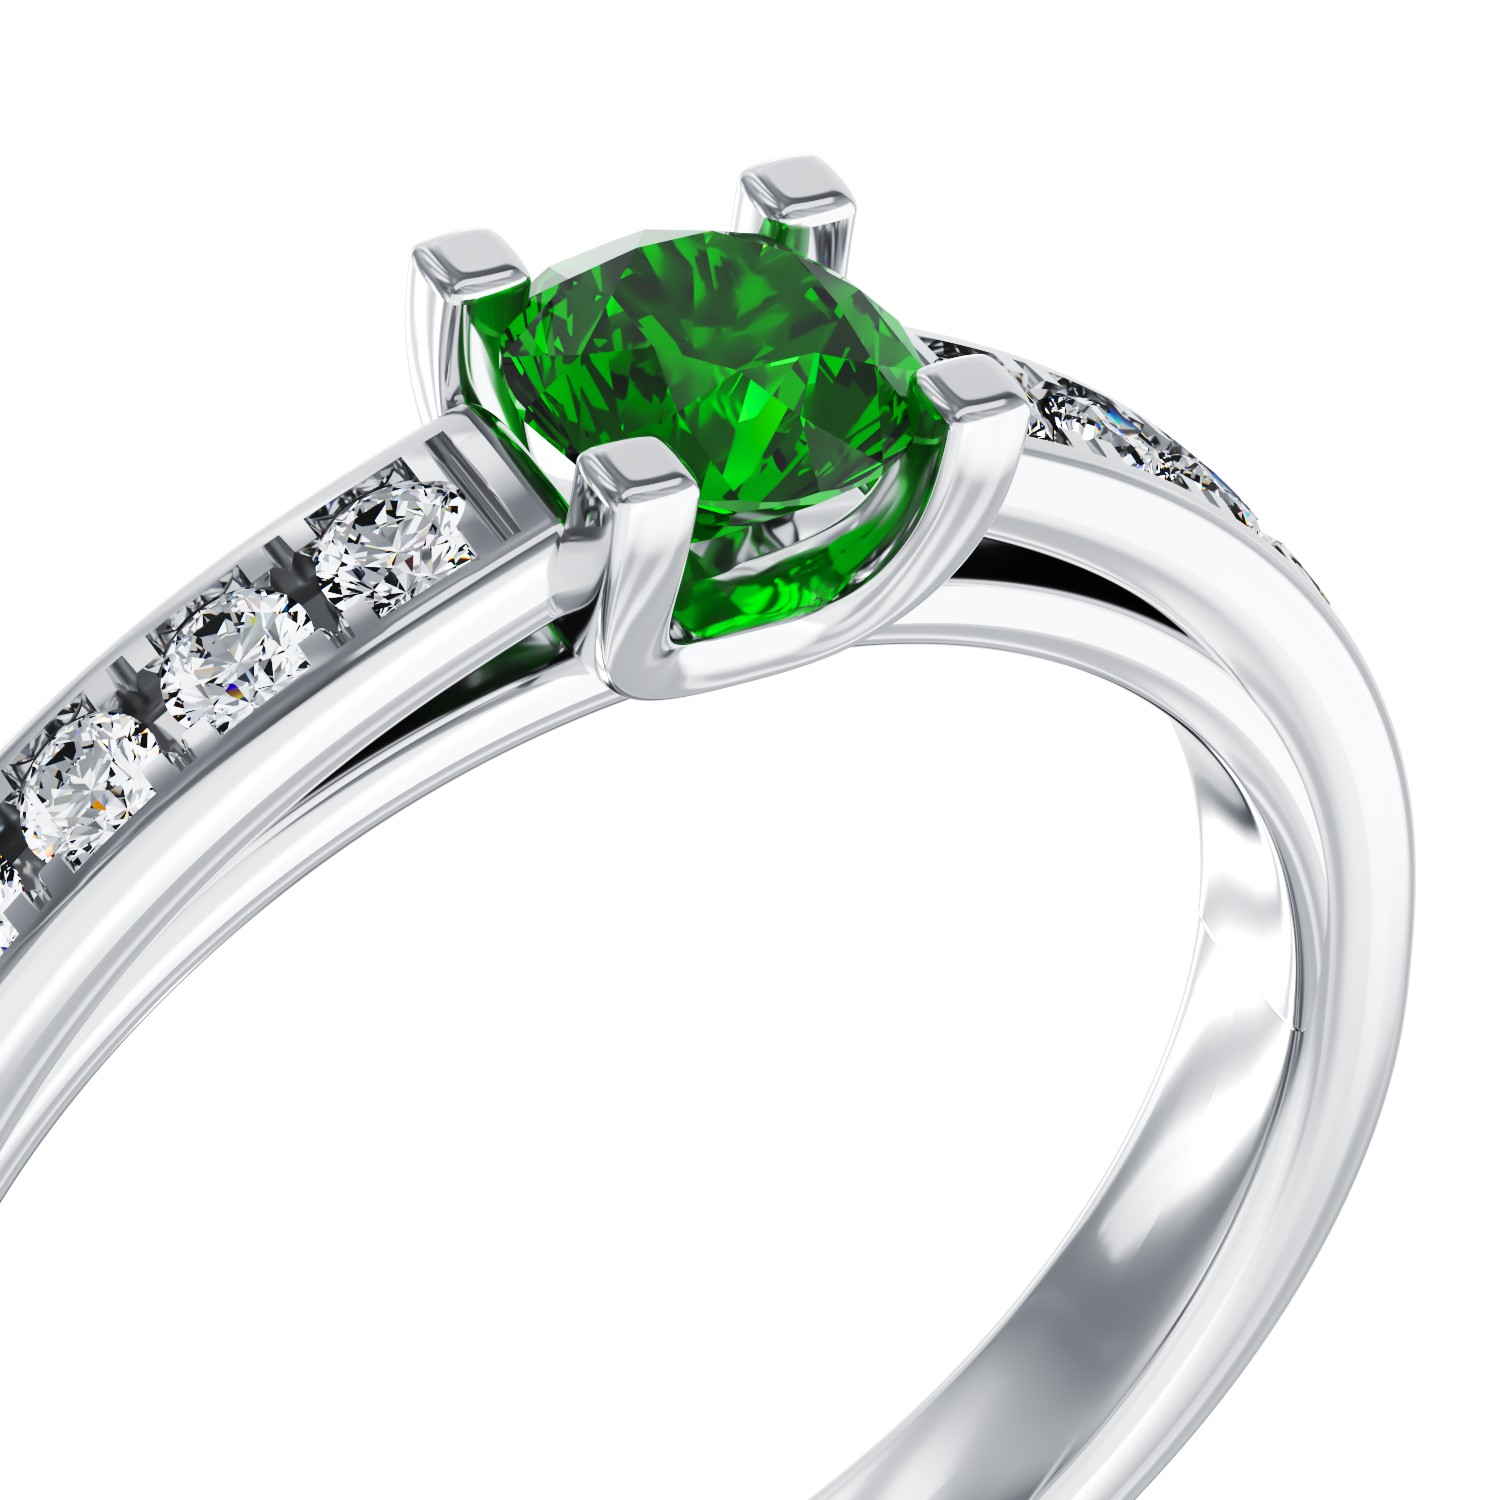 18K white gold engagement ring with 0.25ct emerald and 0.15ct diamonds